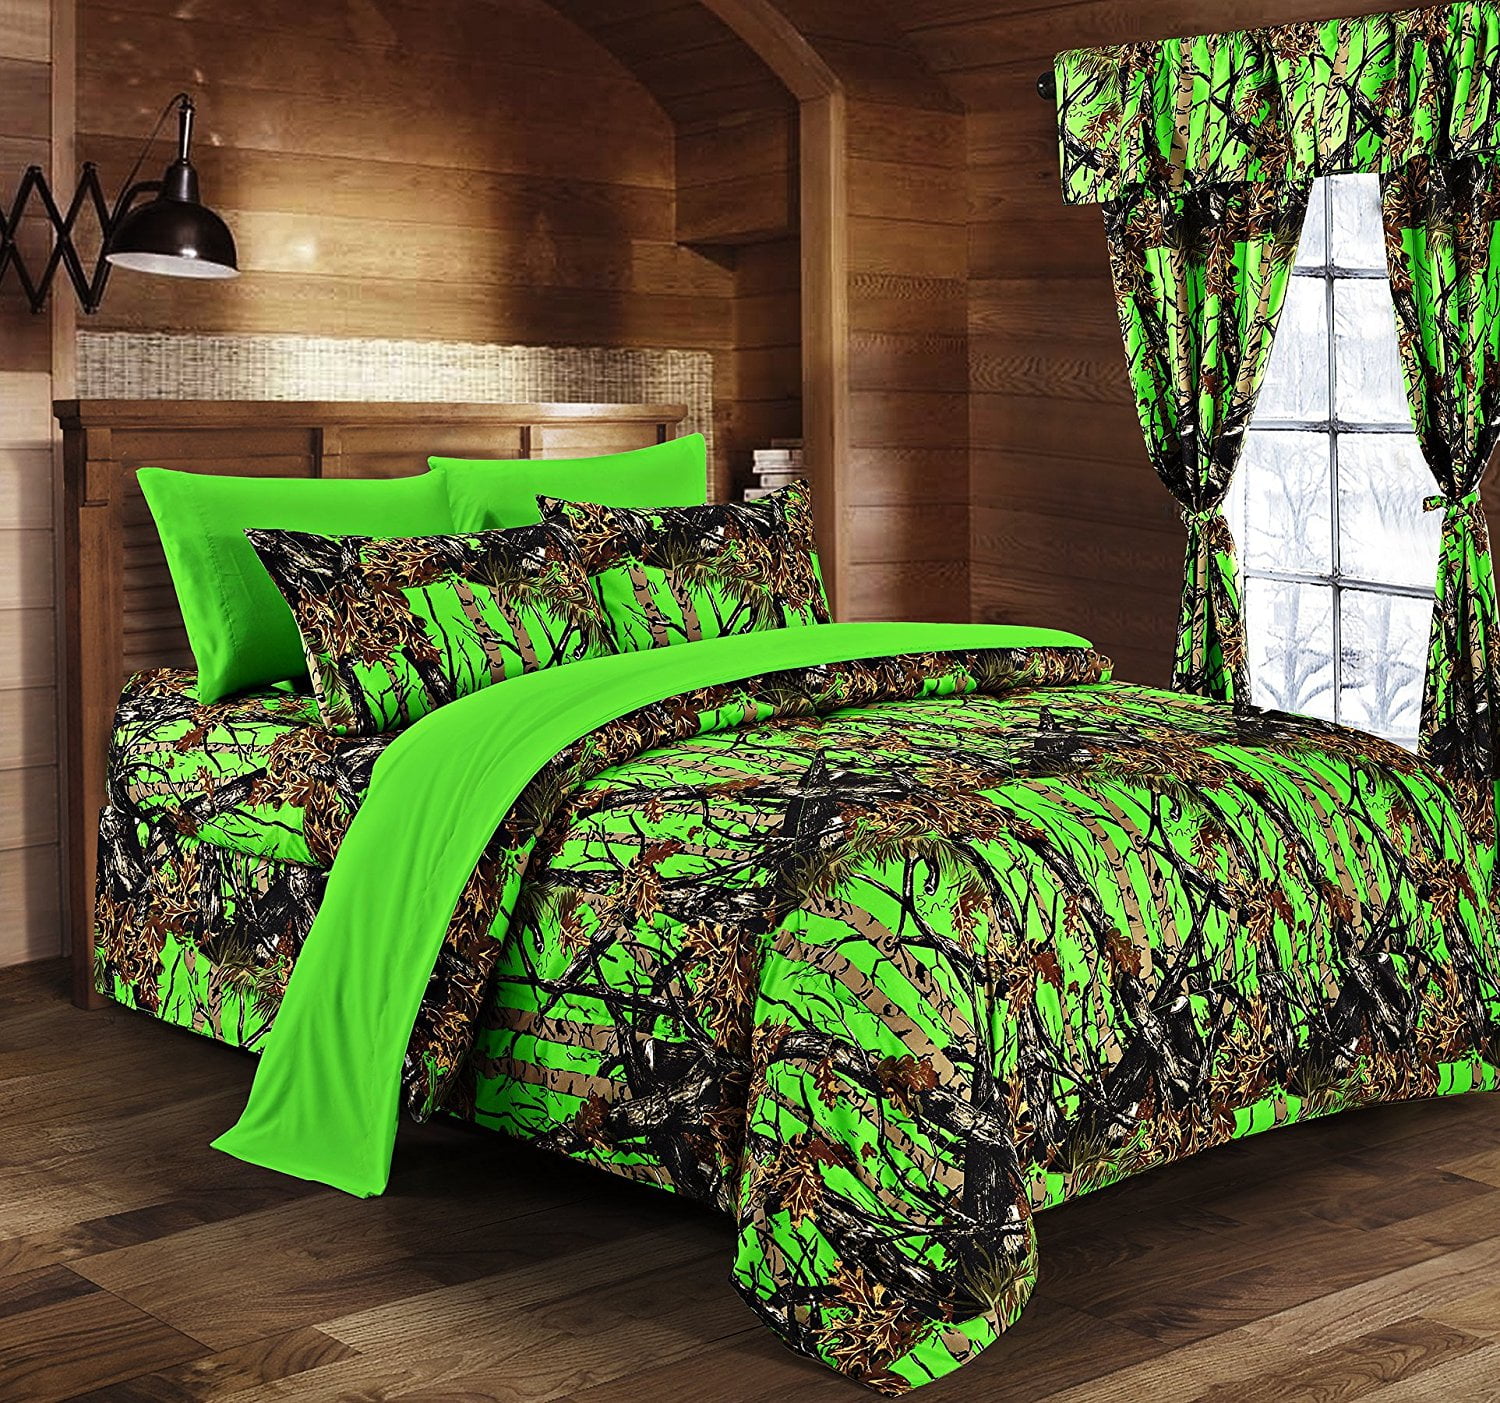 1 PC BLACK CAMO COMFORTER QUEEN SIZE CAMOUFLAGE WOODS COMFORTER ONLY